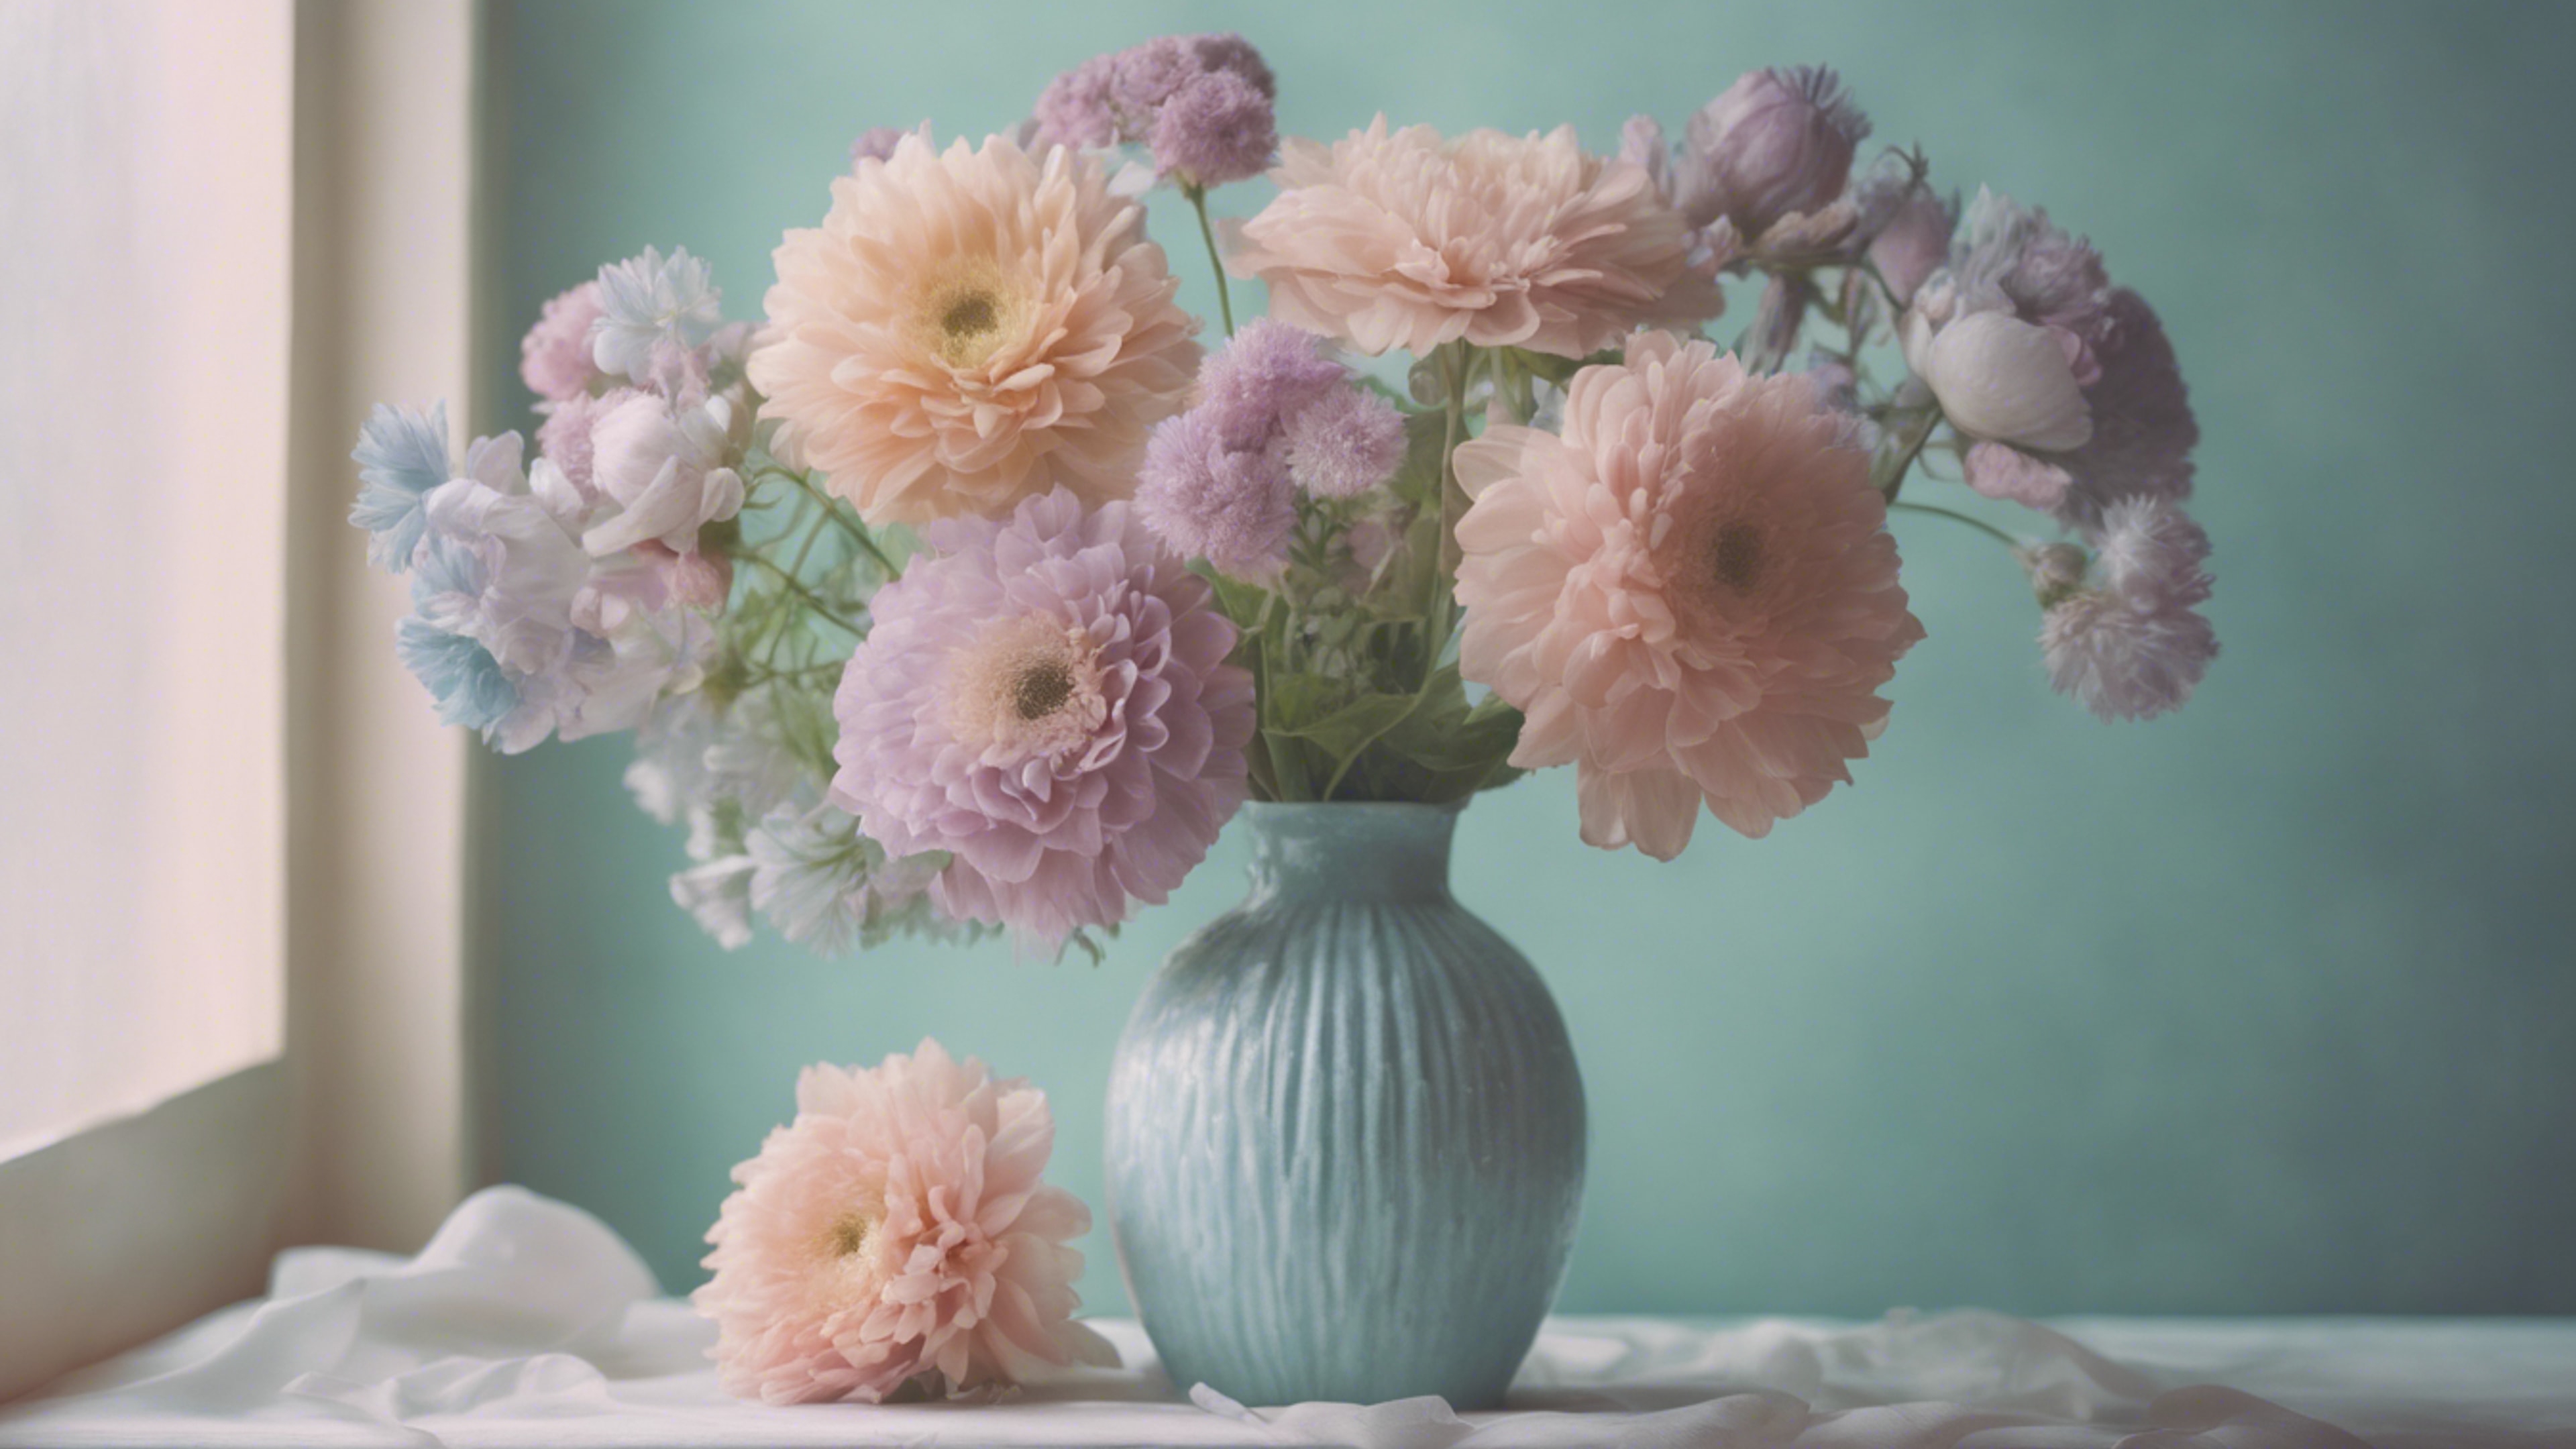 A pastel toned still-life painting featuring cool pastel colored flowers in a vase. 墙纸[6e1327f815a34bc2b32b]